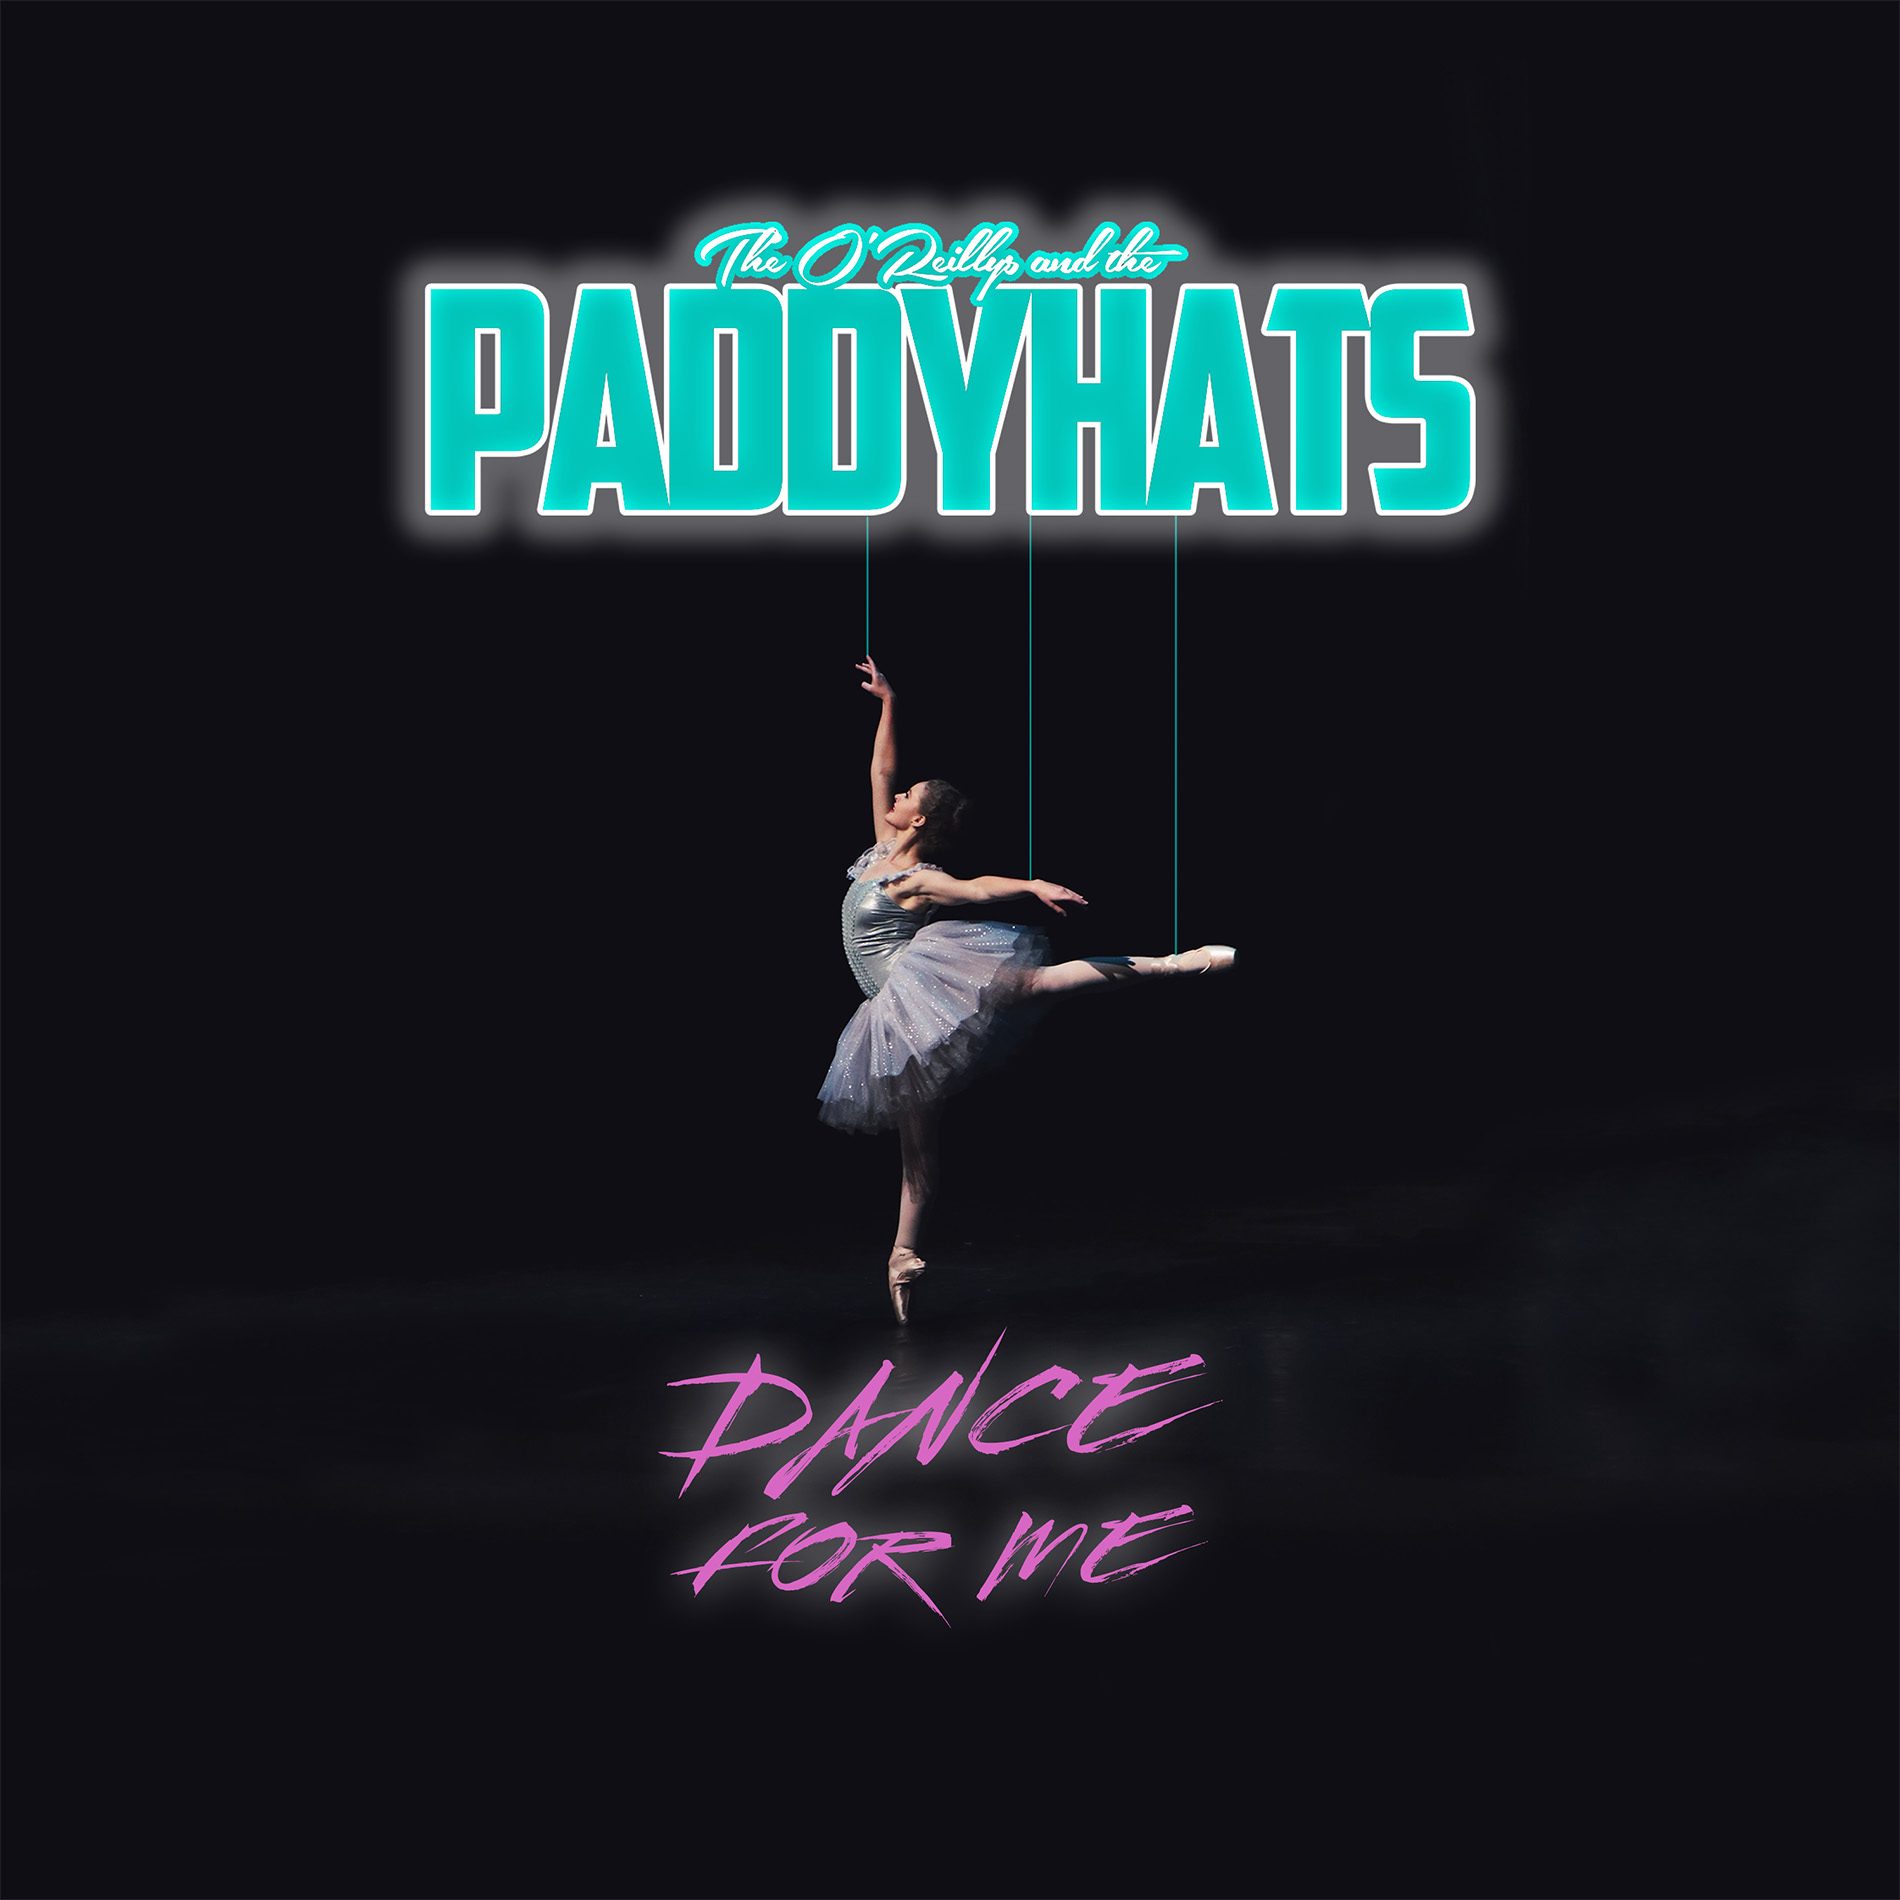 Get your pre-save for “Dance for Me” – our new song now!